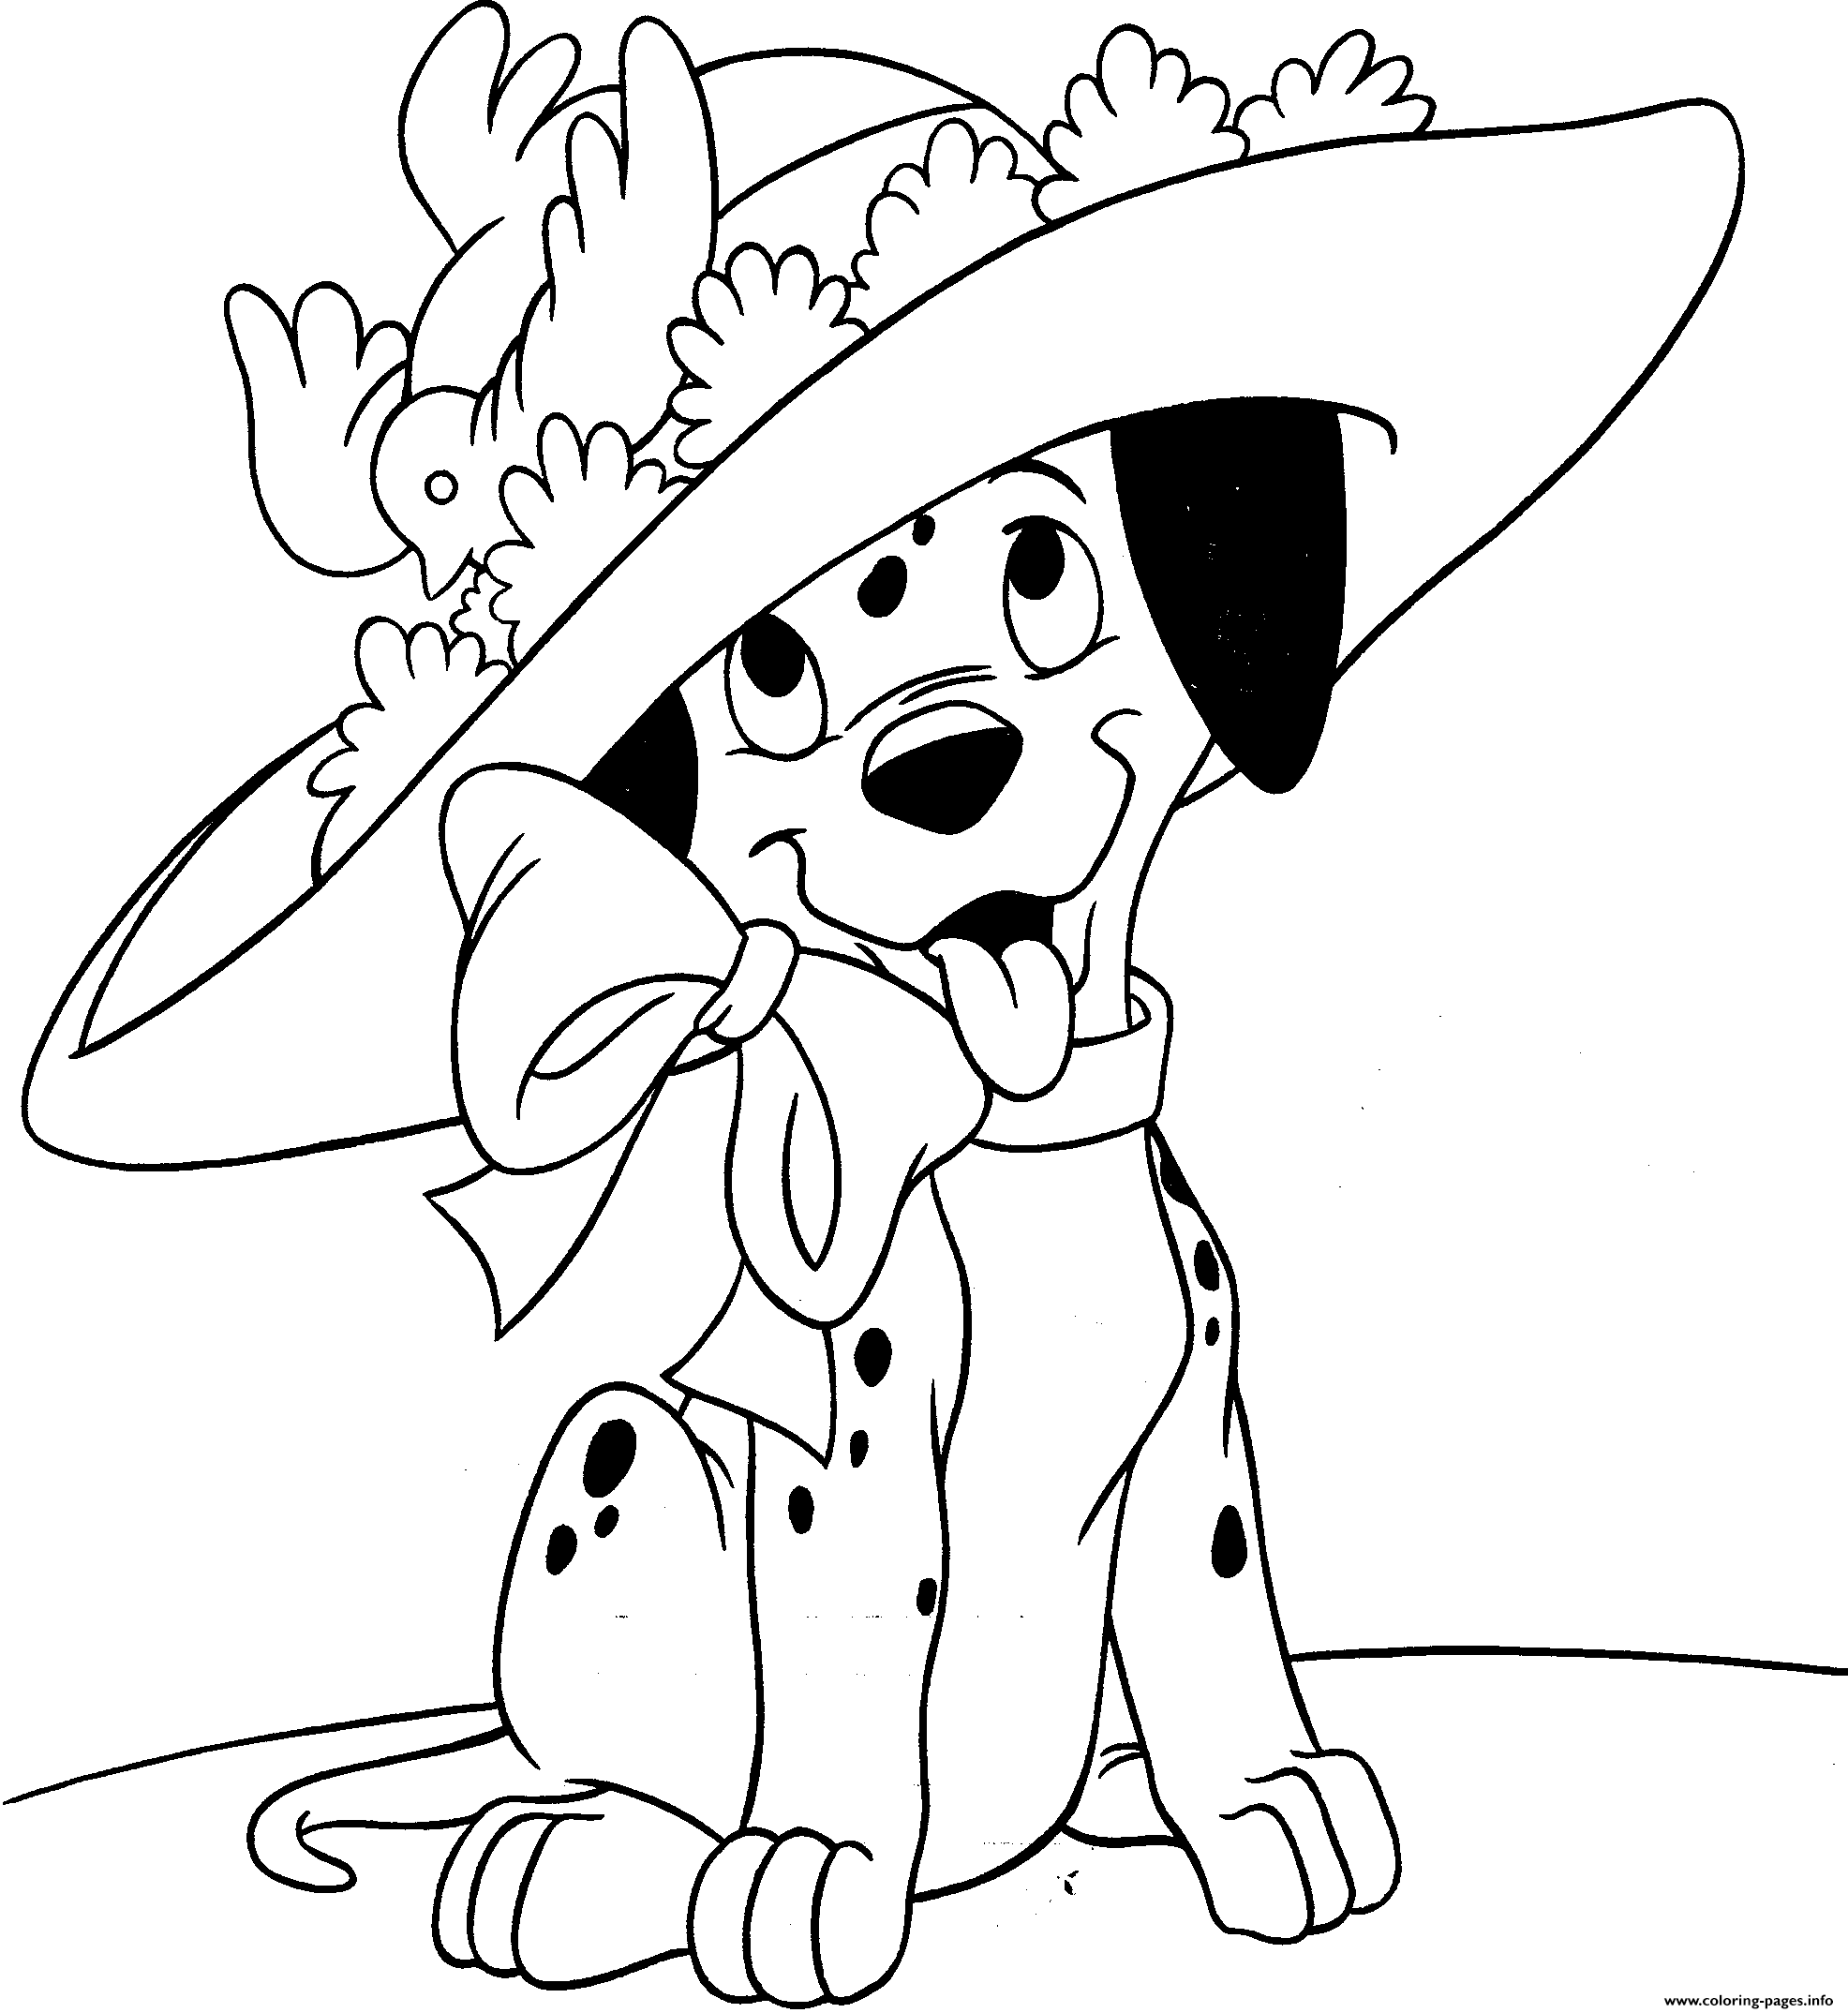 Dalmatian With Fancy Hat 68b4 coloring